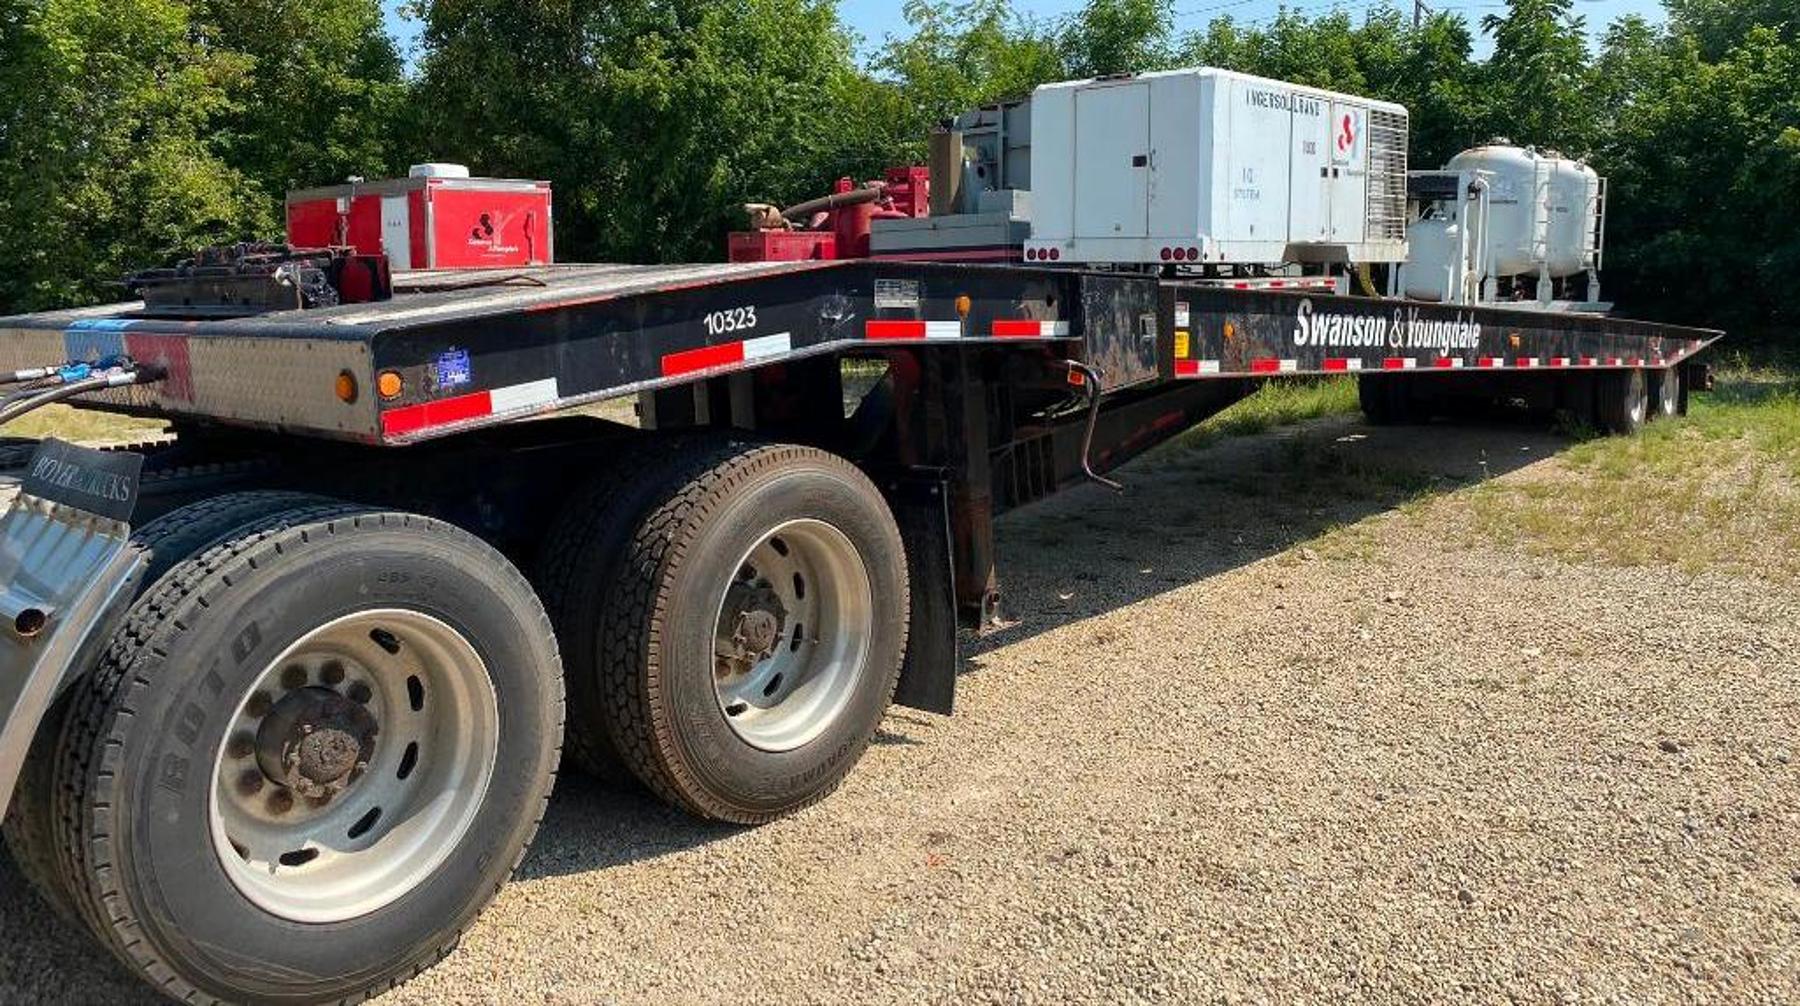 IH 4900 110' Boom Truck, 2000 Freightliner Semi With Cat 3406E 2WS Engine, Talbert 48' Hydraulic Sliding Axle Trailer, 97 Ford Super Duty Dump Truck With 33K Miles, Air Compressor, Tennant Sweeper, IH Flatbed With Liftgate